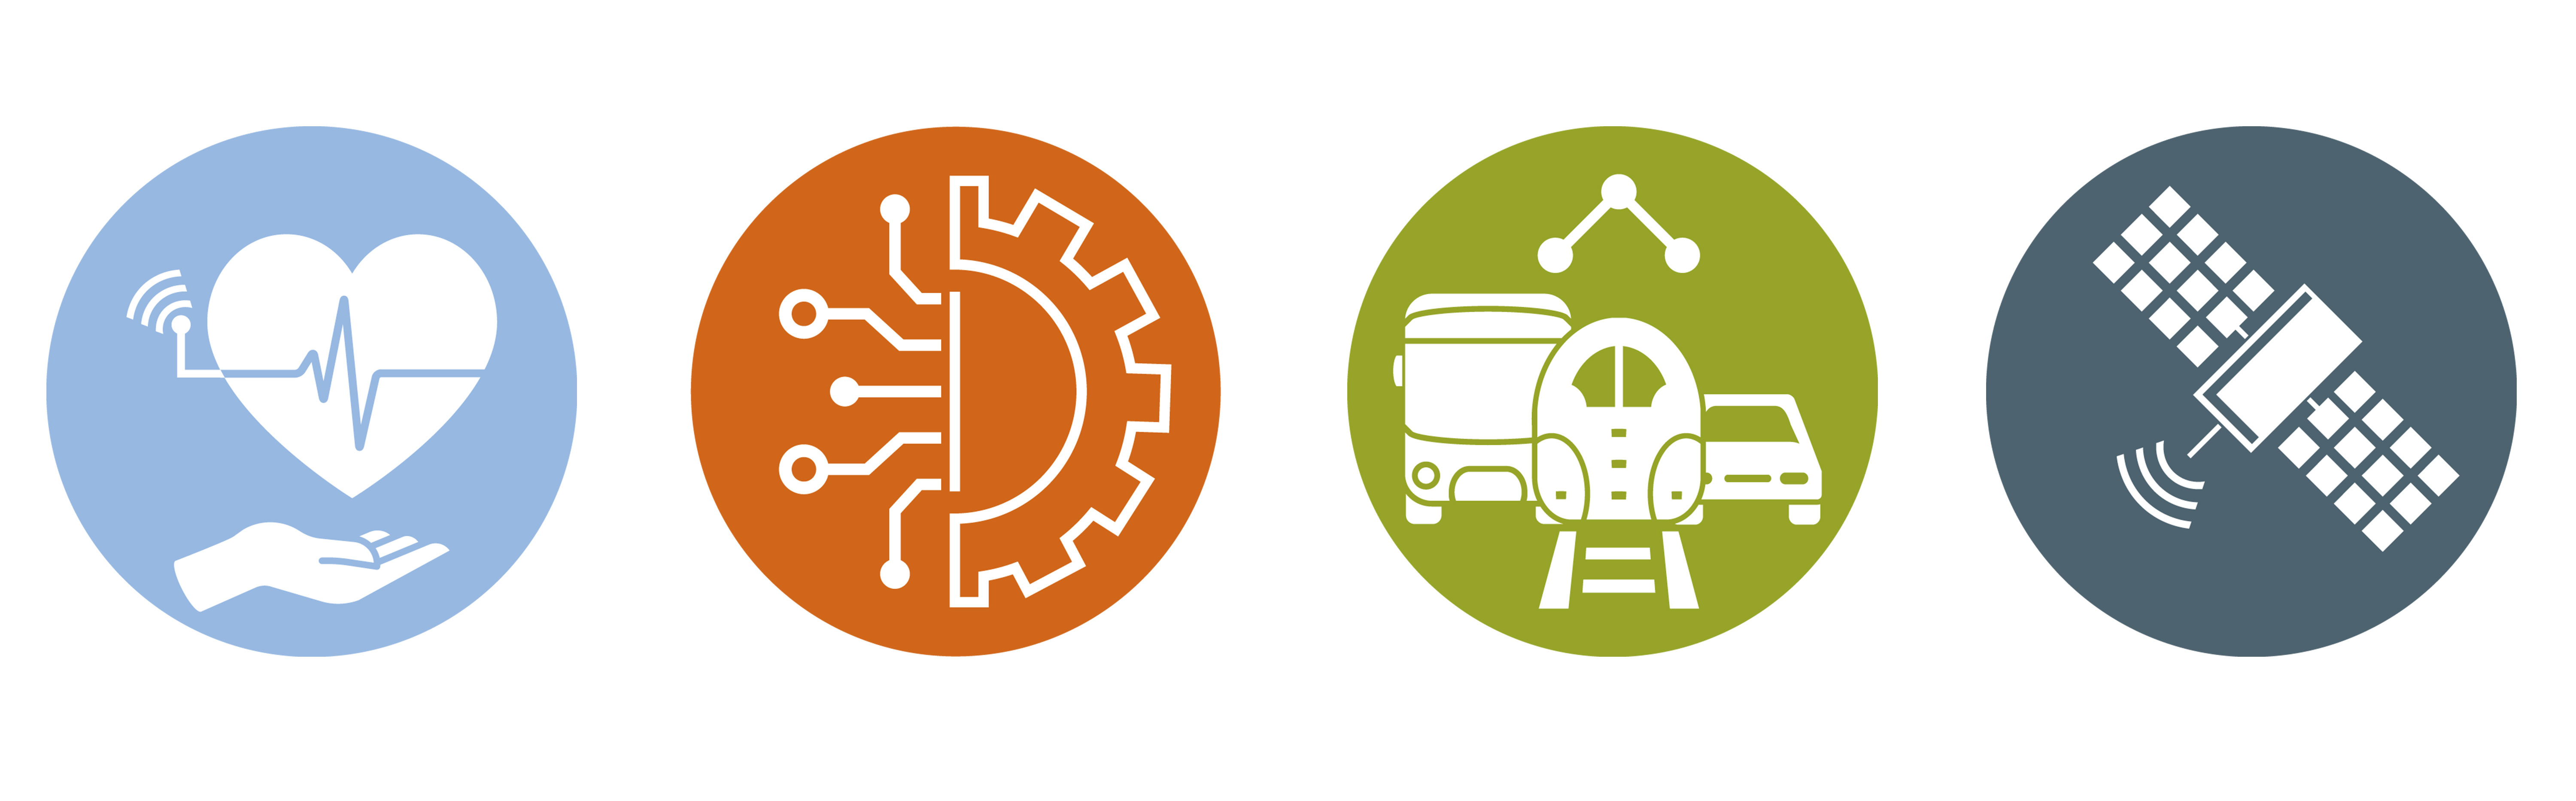 The 4 logos of our business units